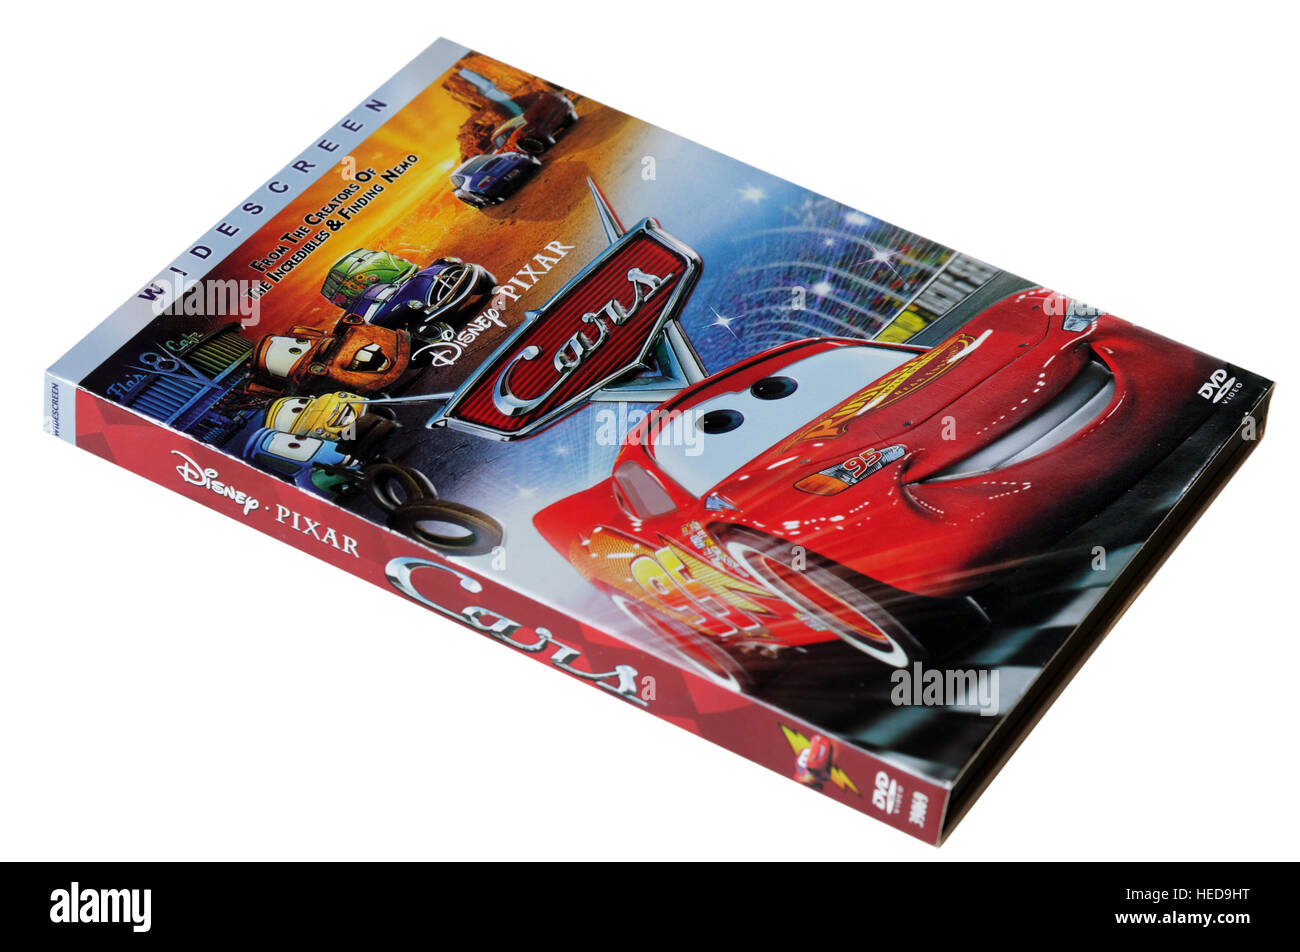 Disney cars Cut Out Stock Images & Pictures - Alamy